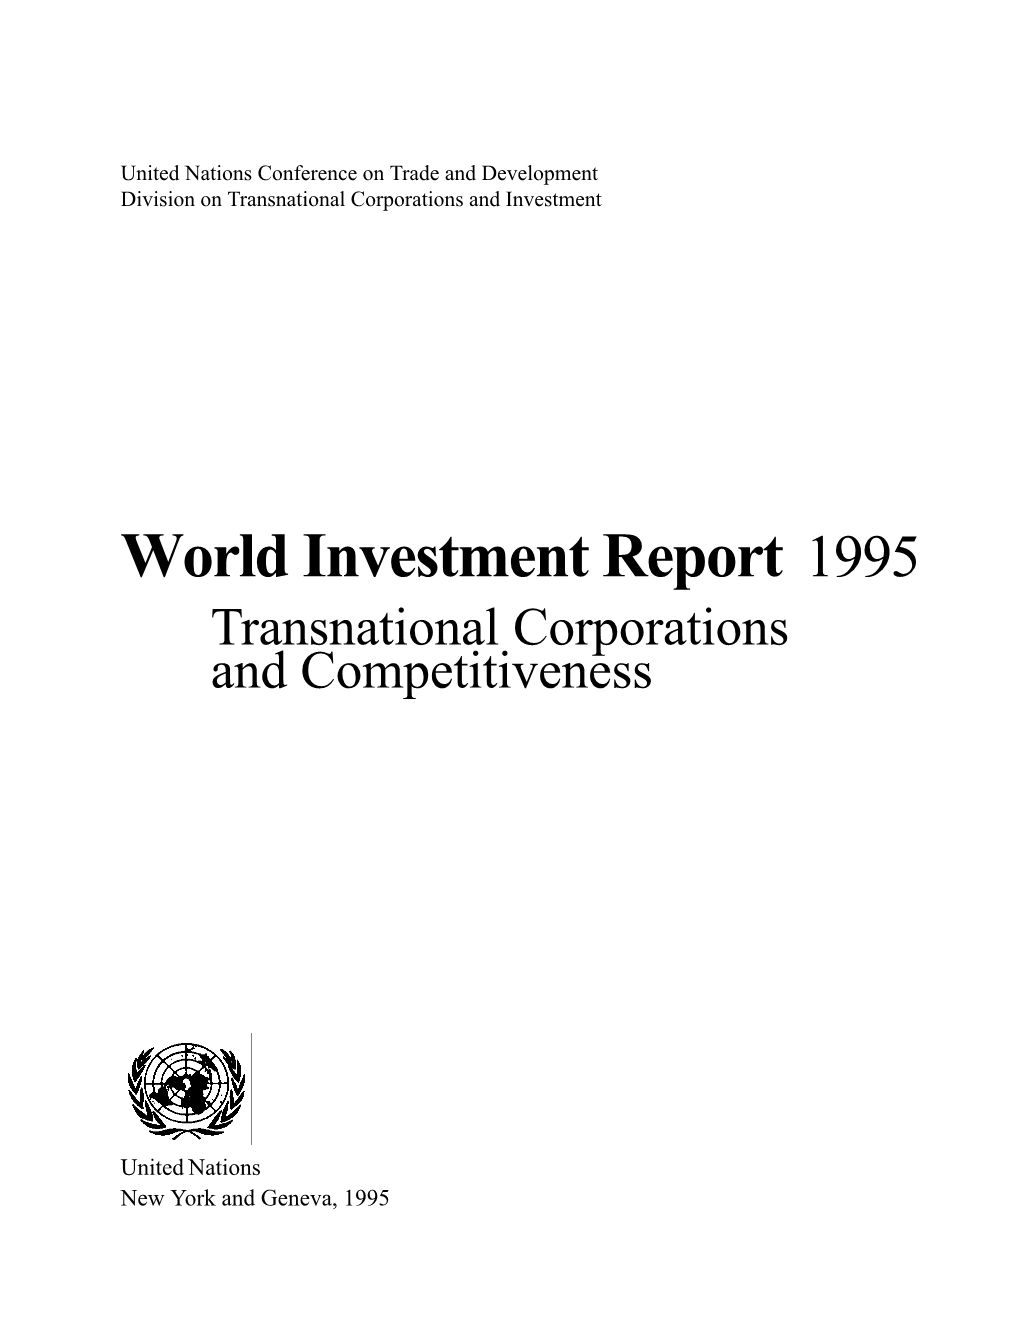 World Investment Report 1995 Transnational Corporations and Competitiveness